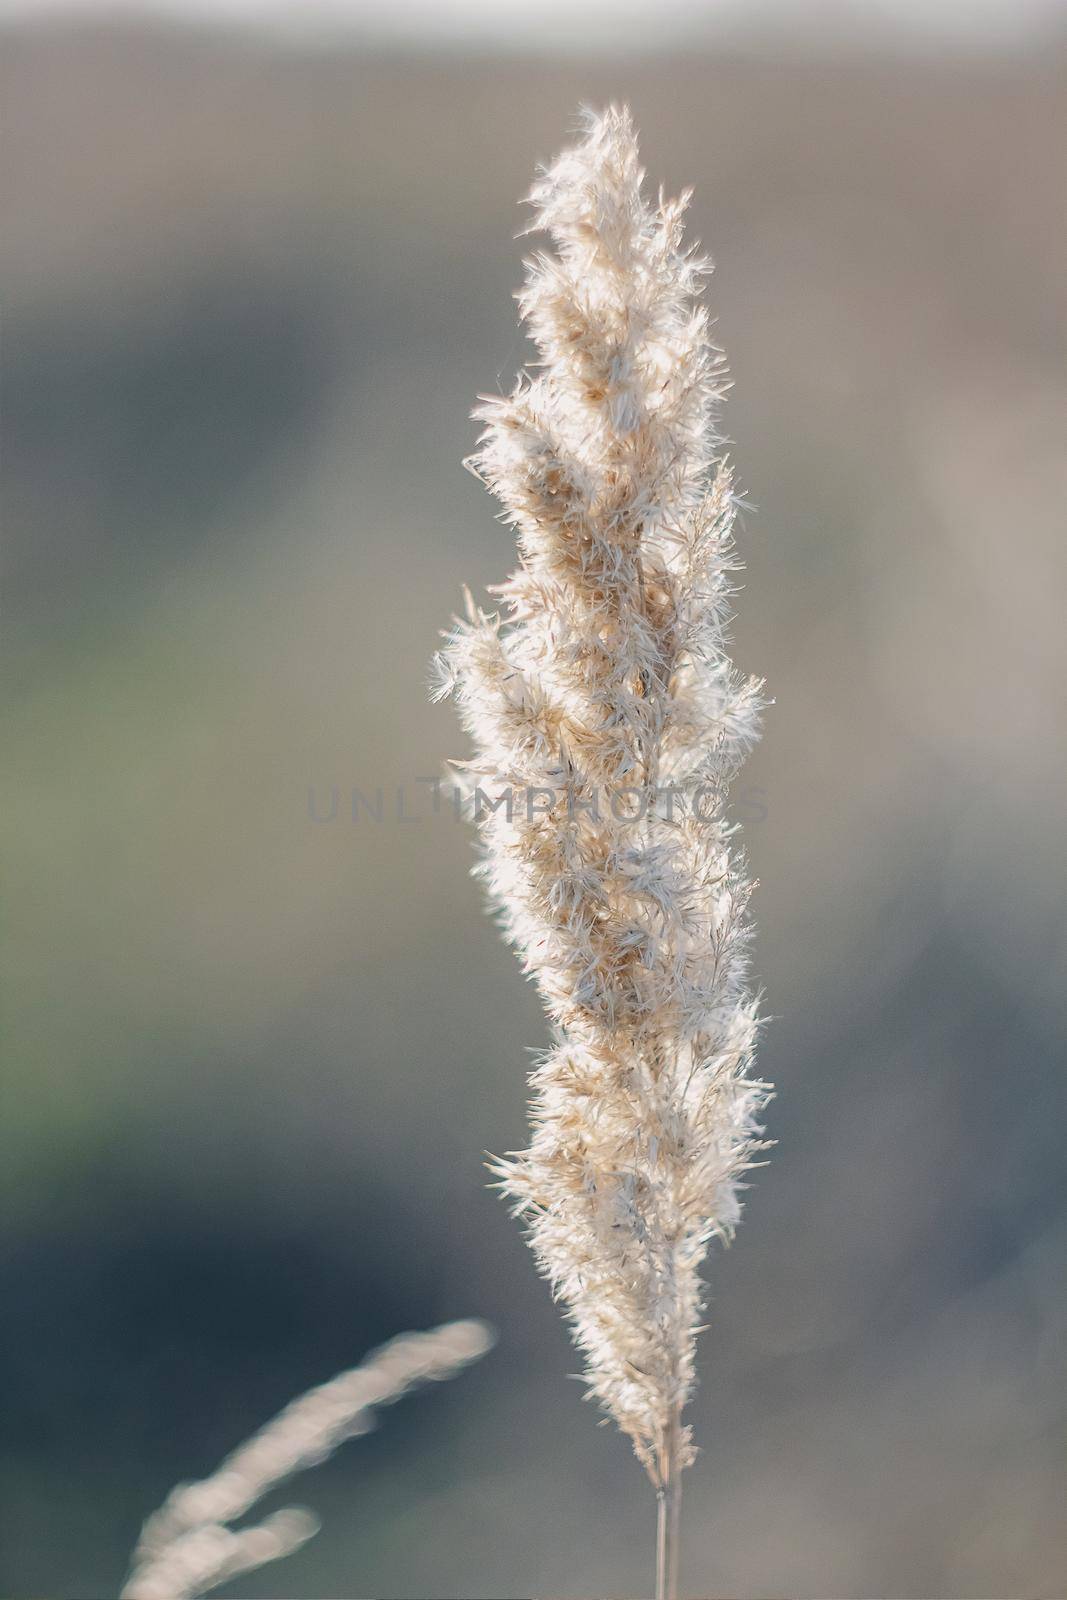 Cortaderia selloana tall trendy pampass grass swaying majestically in the wind against sunset field by mmp1206